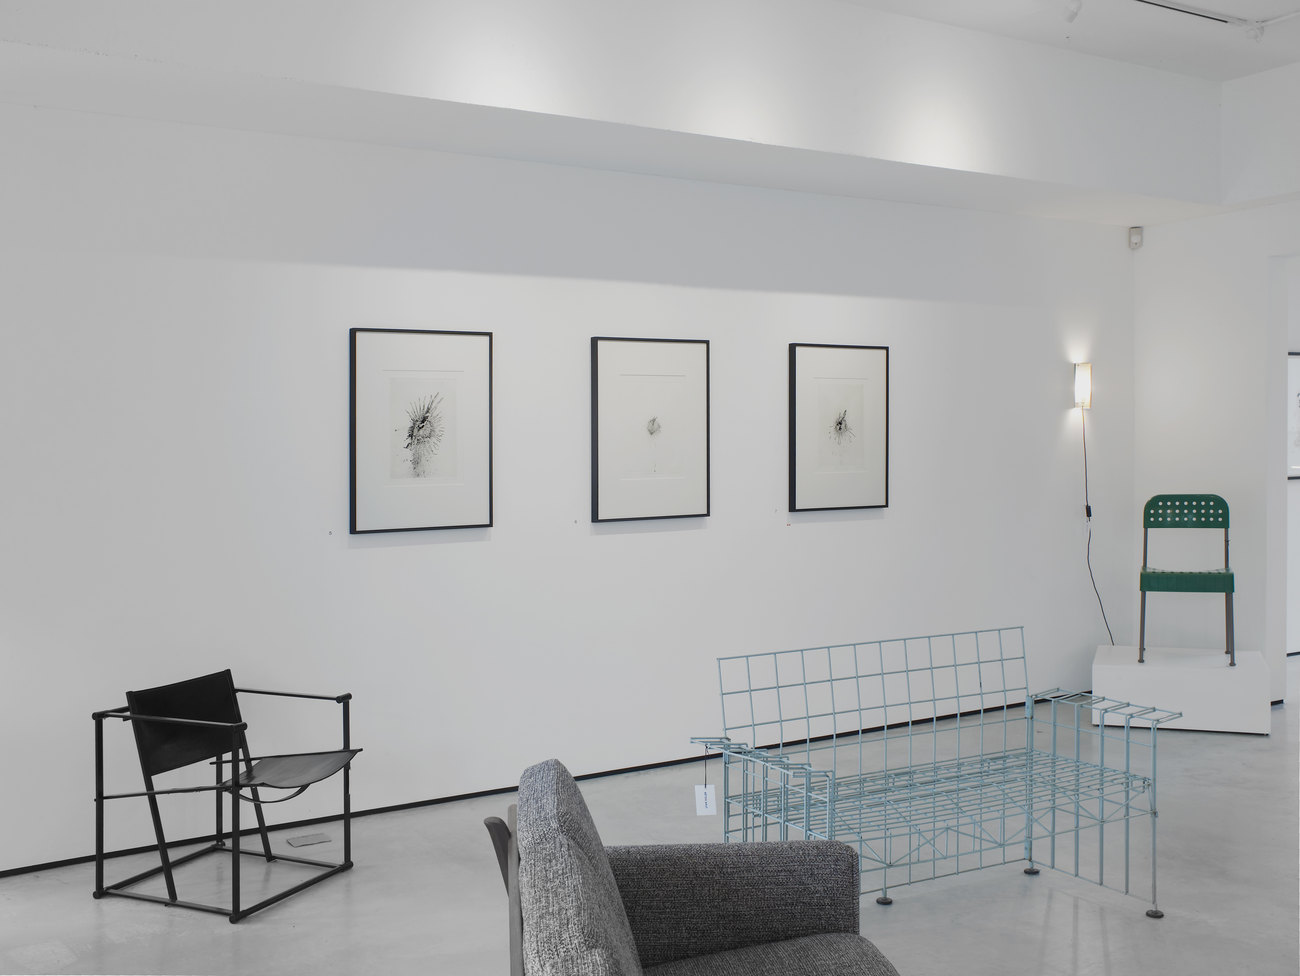 4 chairs in a room, there are three framed images on a white wall behind